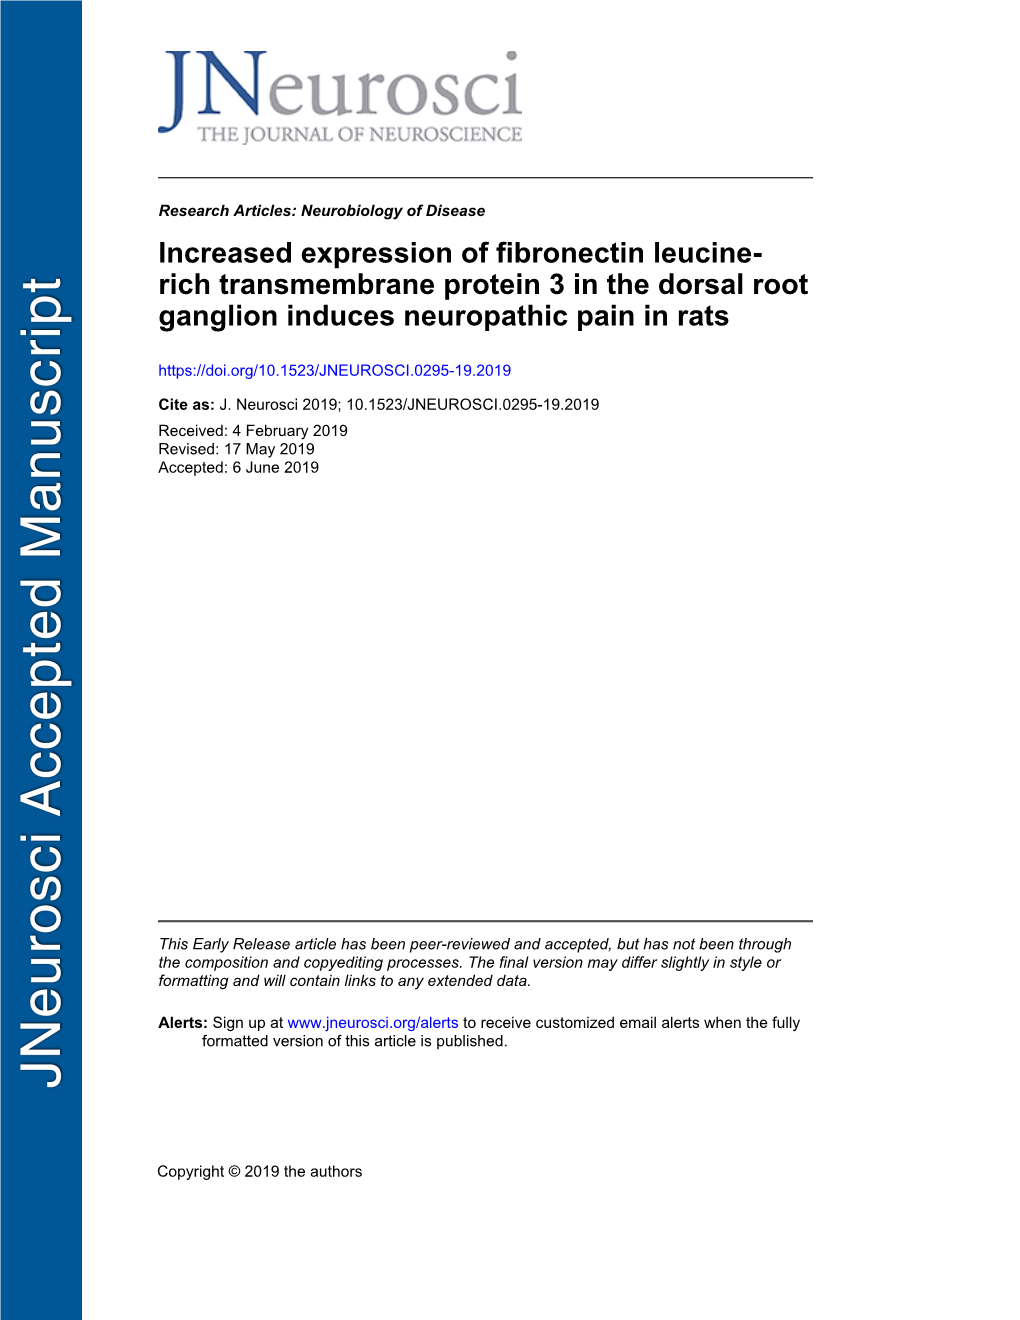 Increased Expression of Fibronectin Leucine-Rich Transmembrane Protein 3 in The